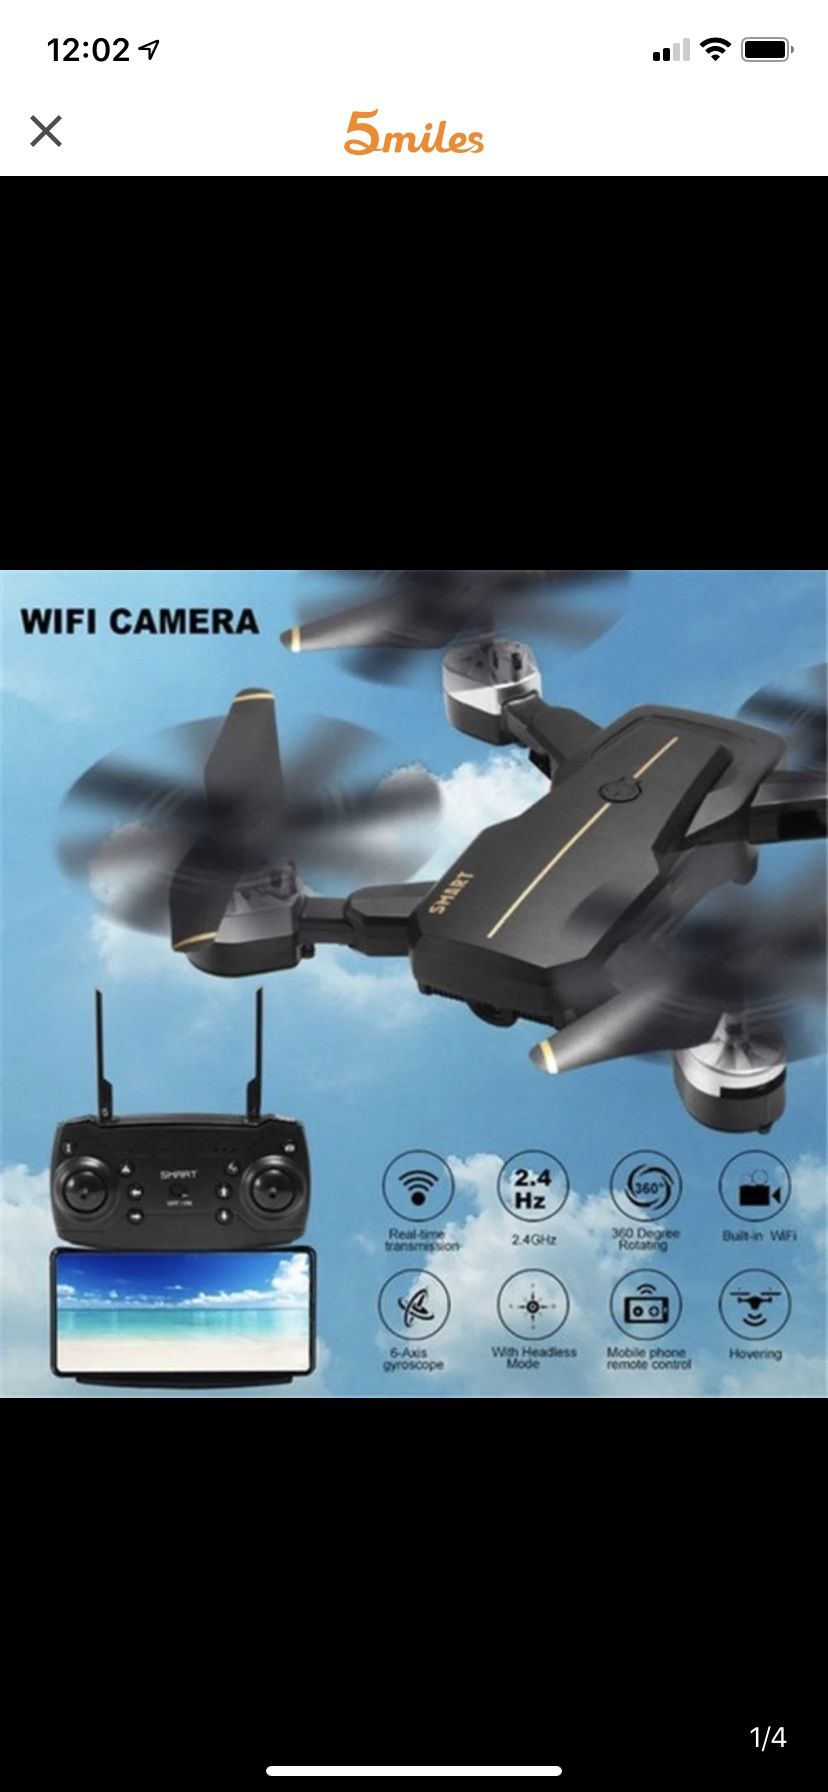 Visible Wind Professional Intelligent Folding Drones WiFi FPV Fixed High 480P/720P HD Camera Stable Gimbal Headless Mode Quadcopter,480P Camera